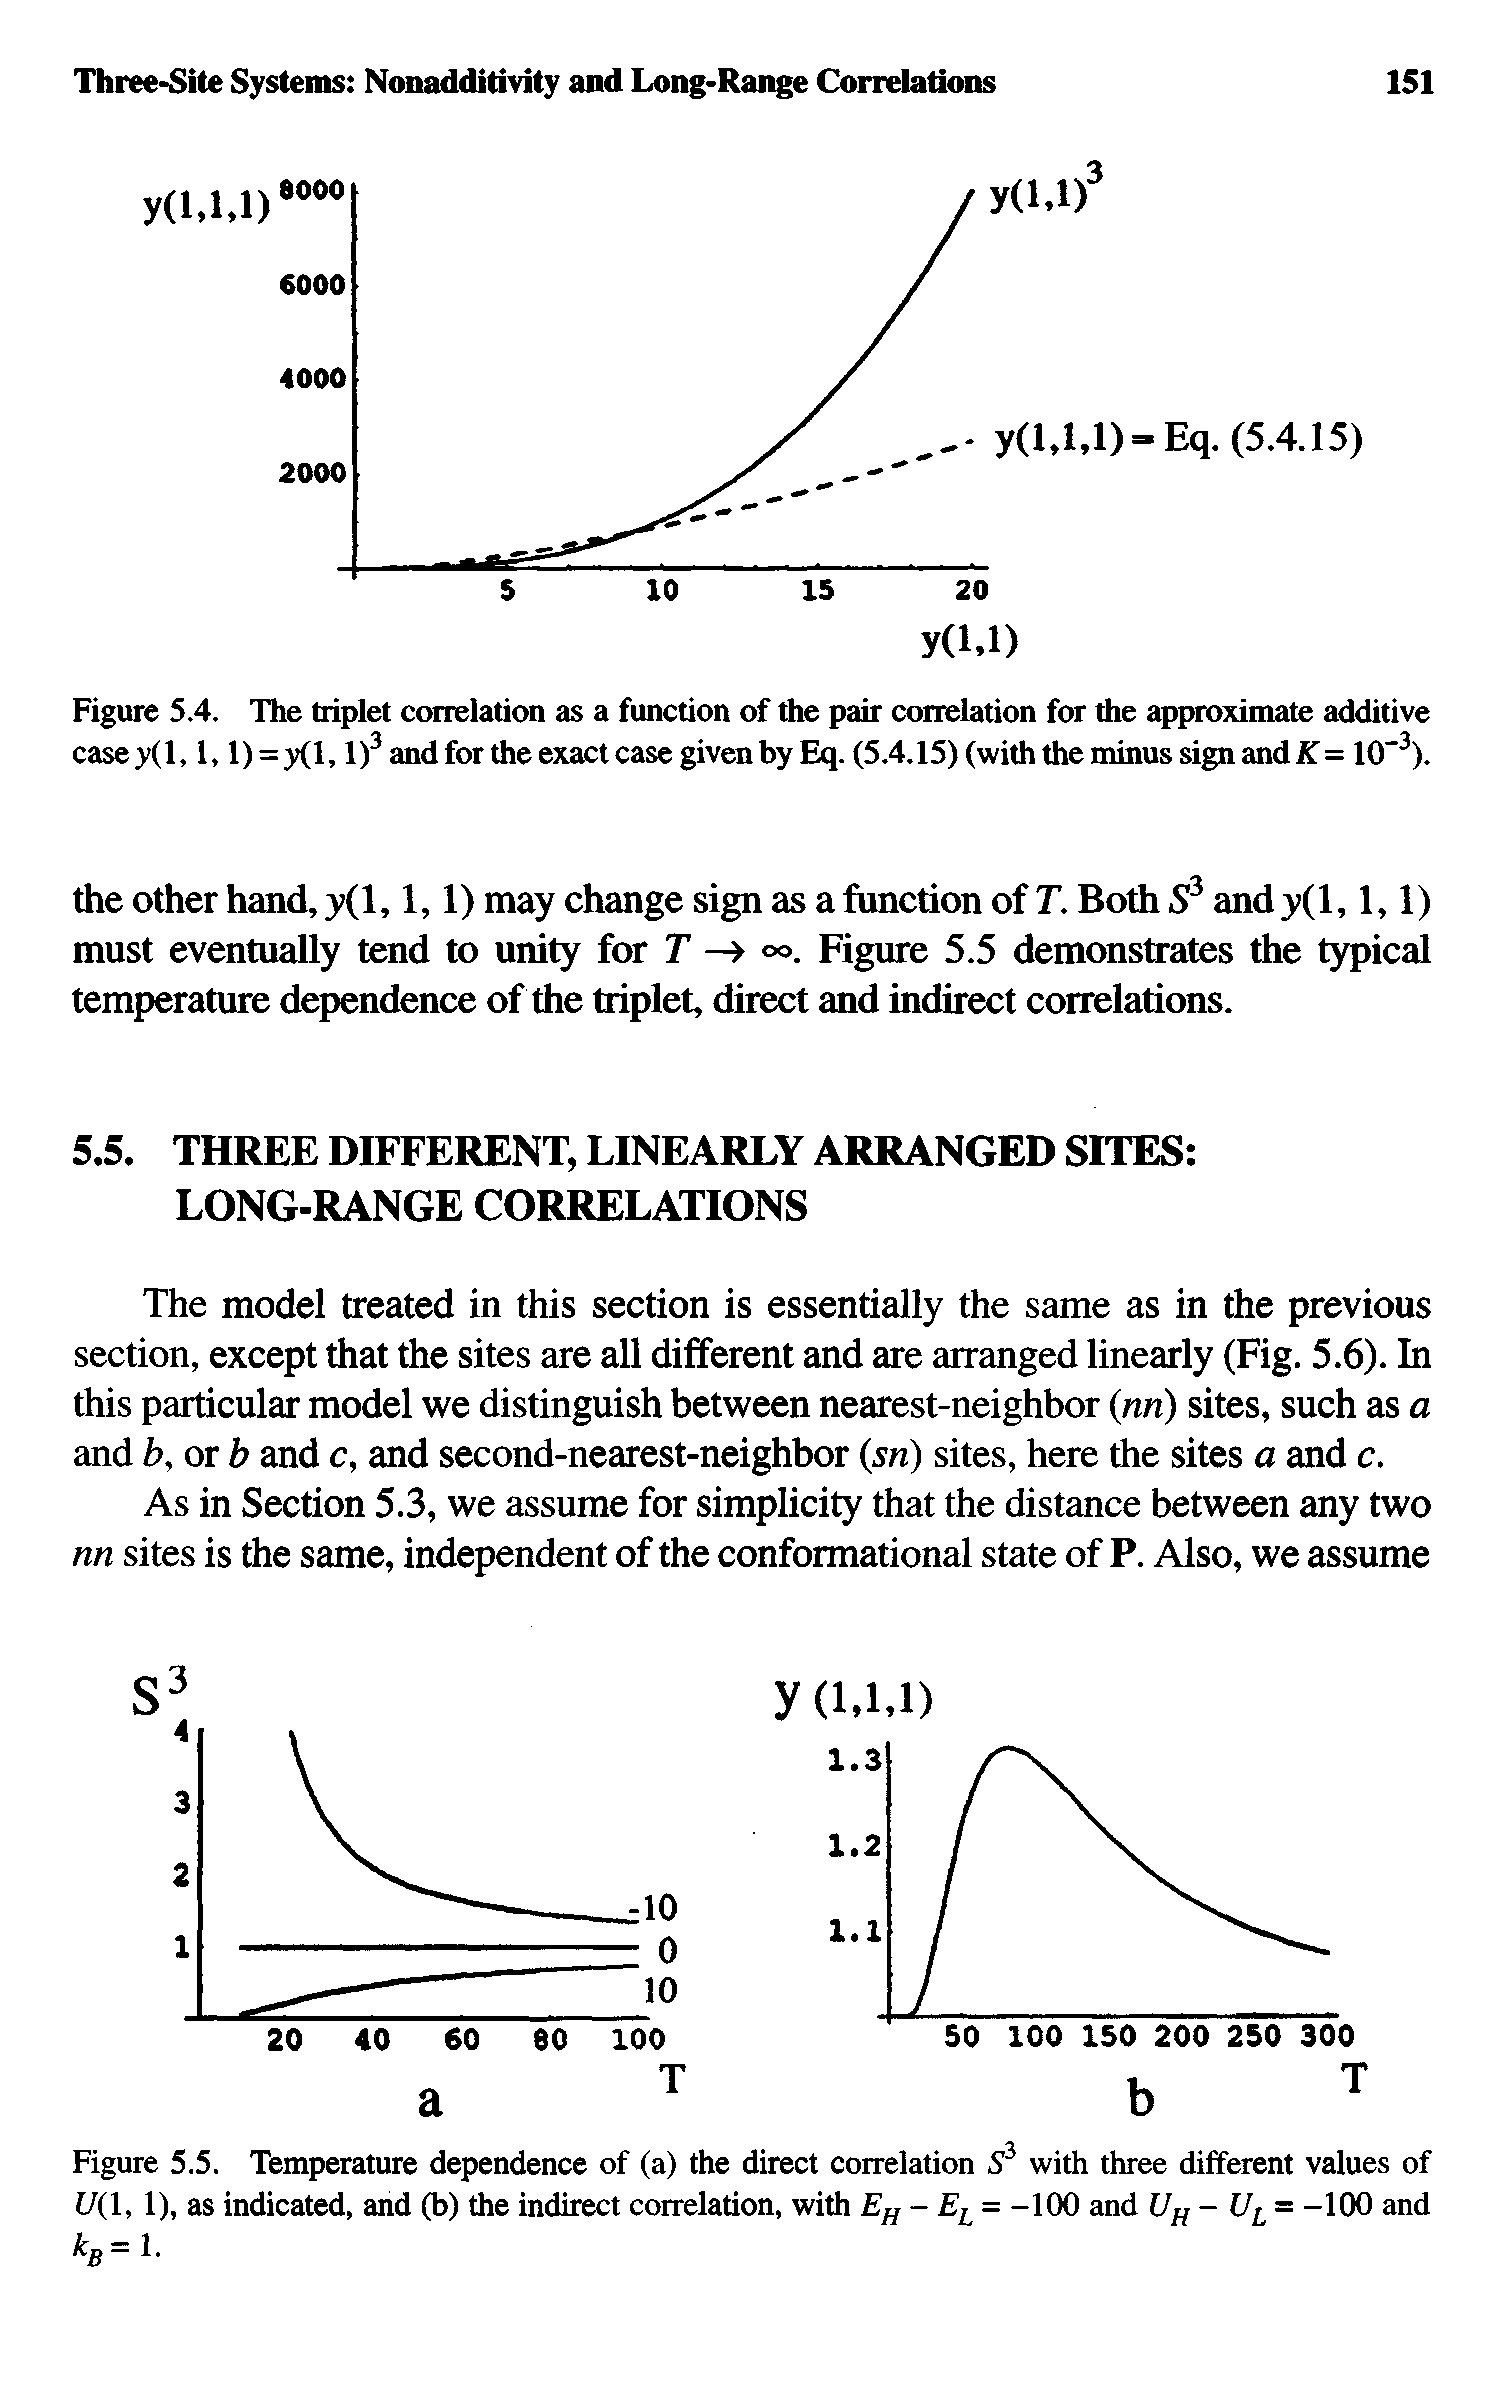 Figure 5.4. The triplet correlation as a function of the pair correlation for the approximate additive casey(l, 1, l) = y(l, 1) and for the exact case given by Eq. (5.4.15) (with the minus sign and AT= 10" ...